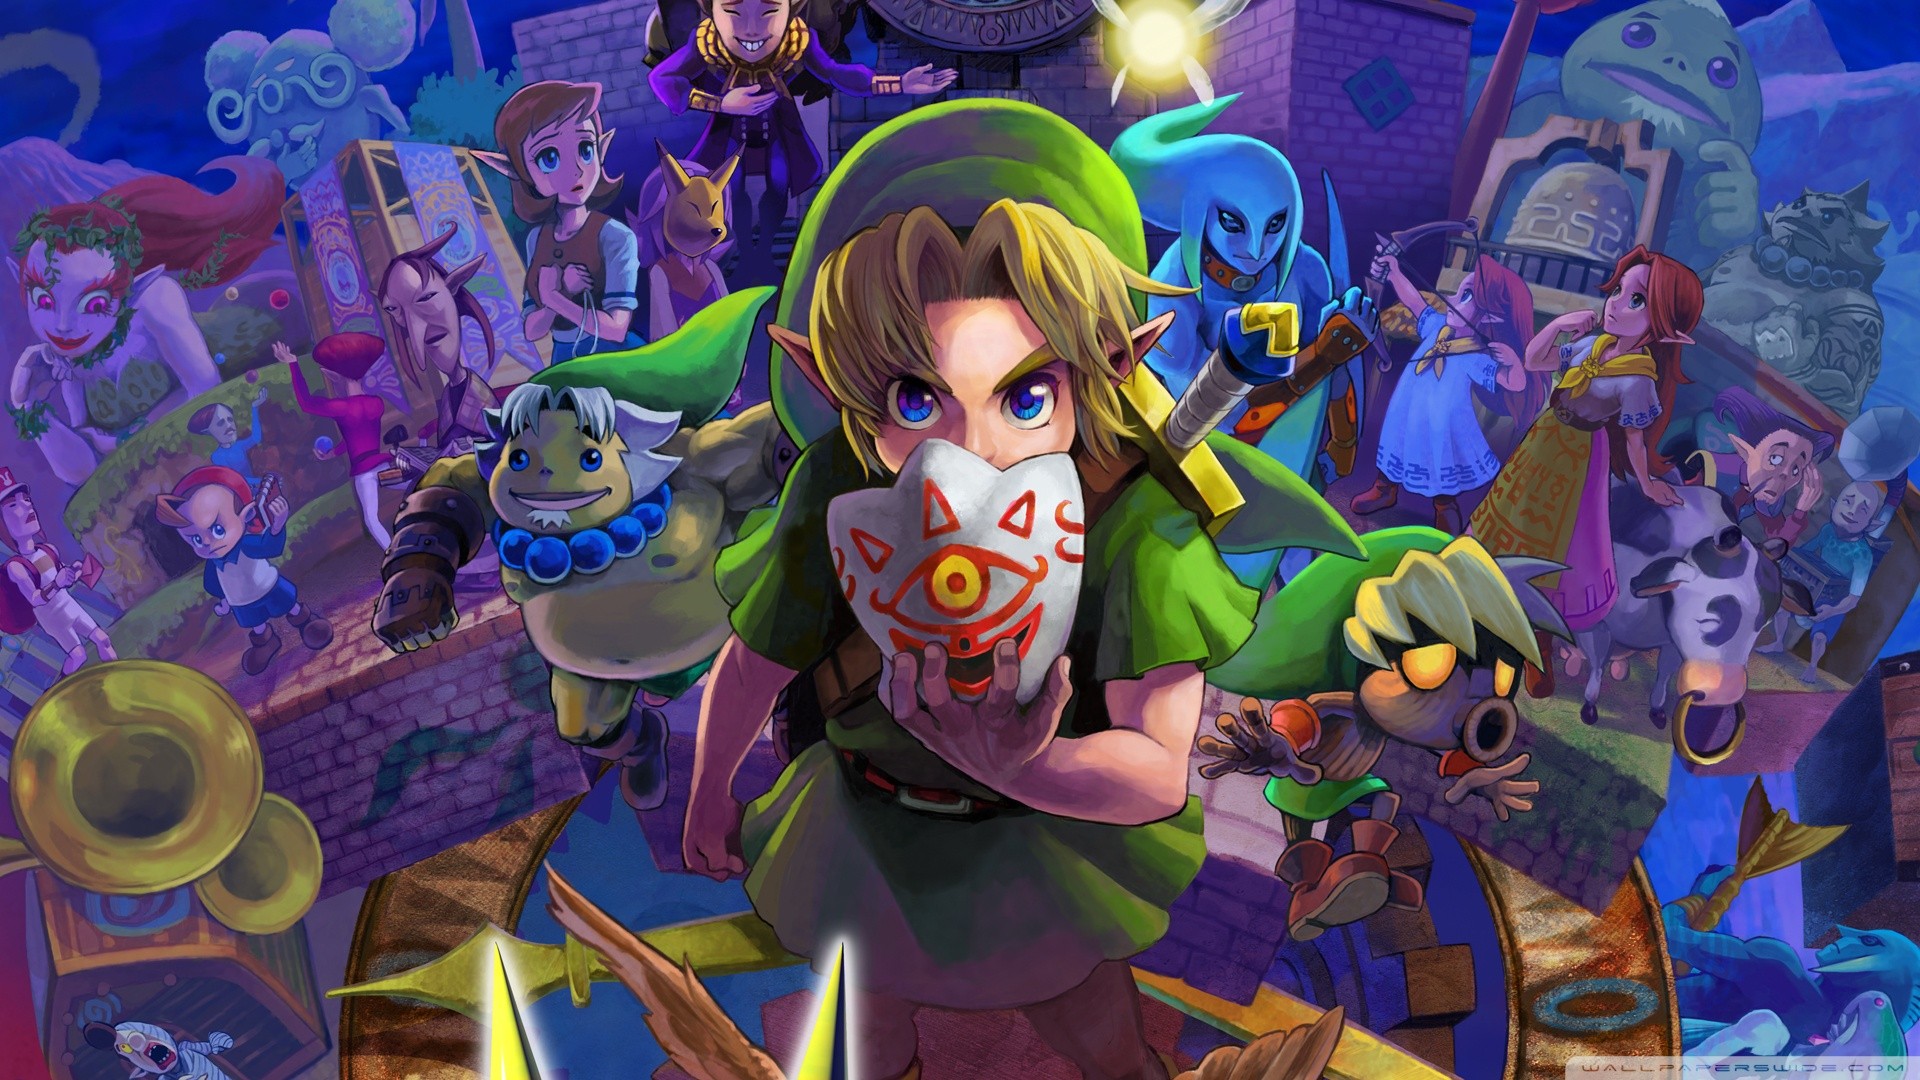 Zelda Free Game Magic Ocarina Quest of Time android iOS apk